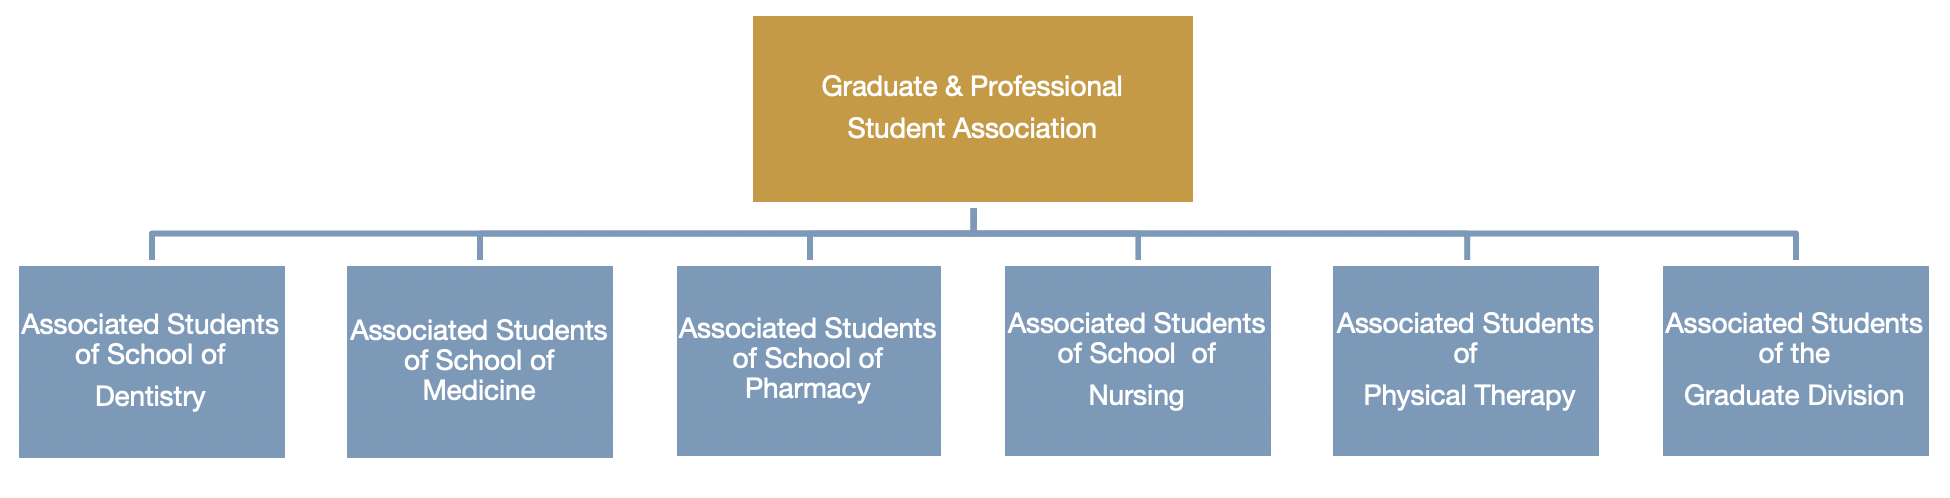 UCSF Student Government Structure Image